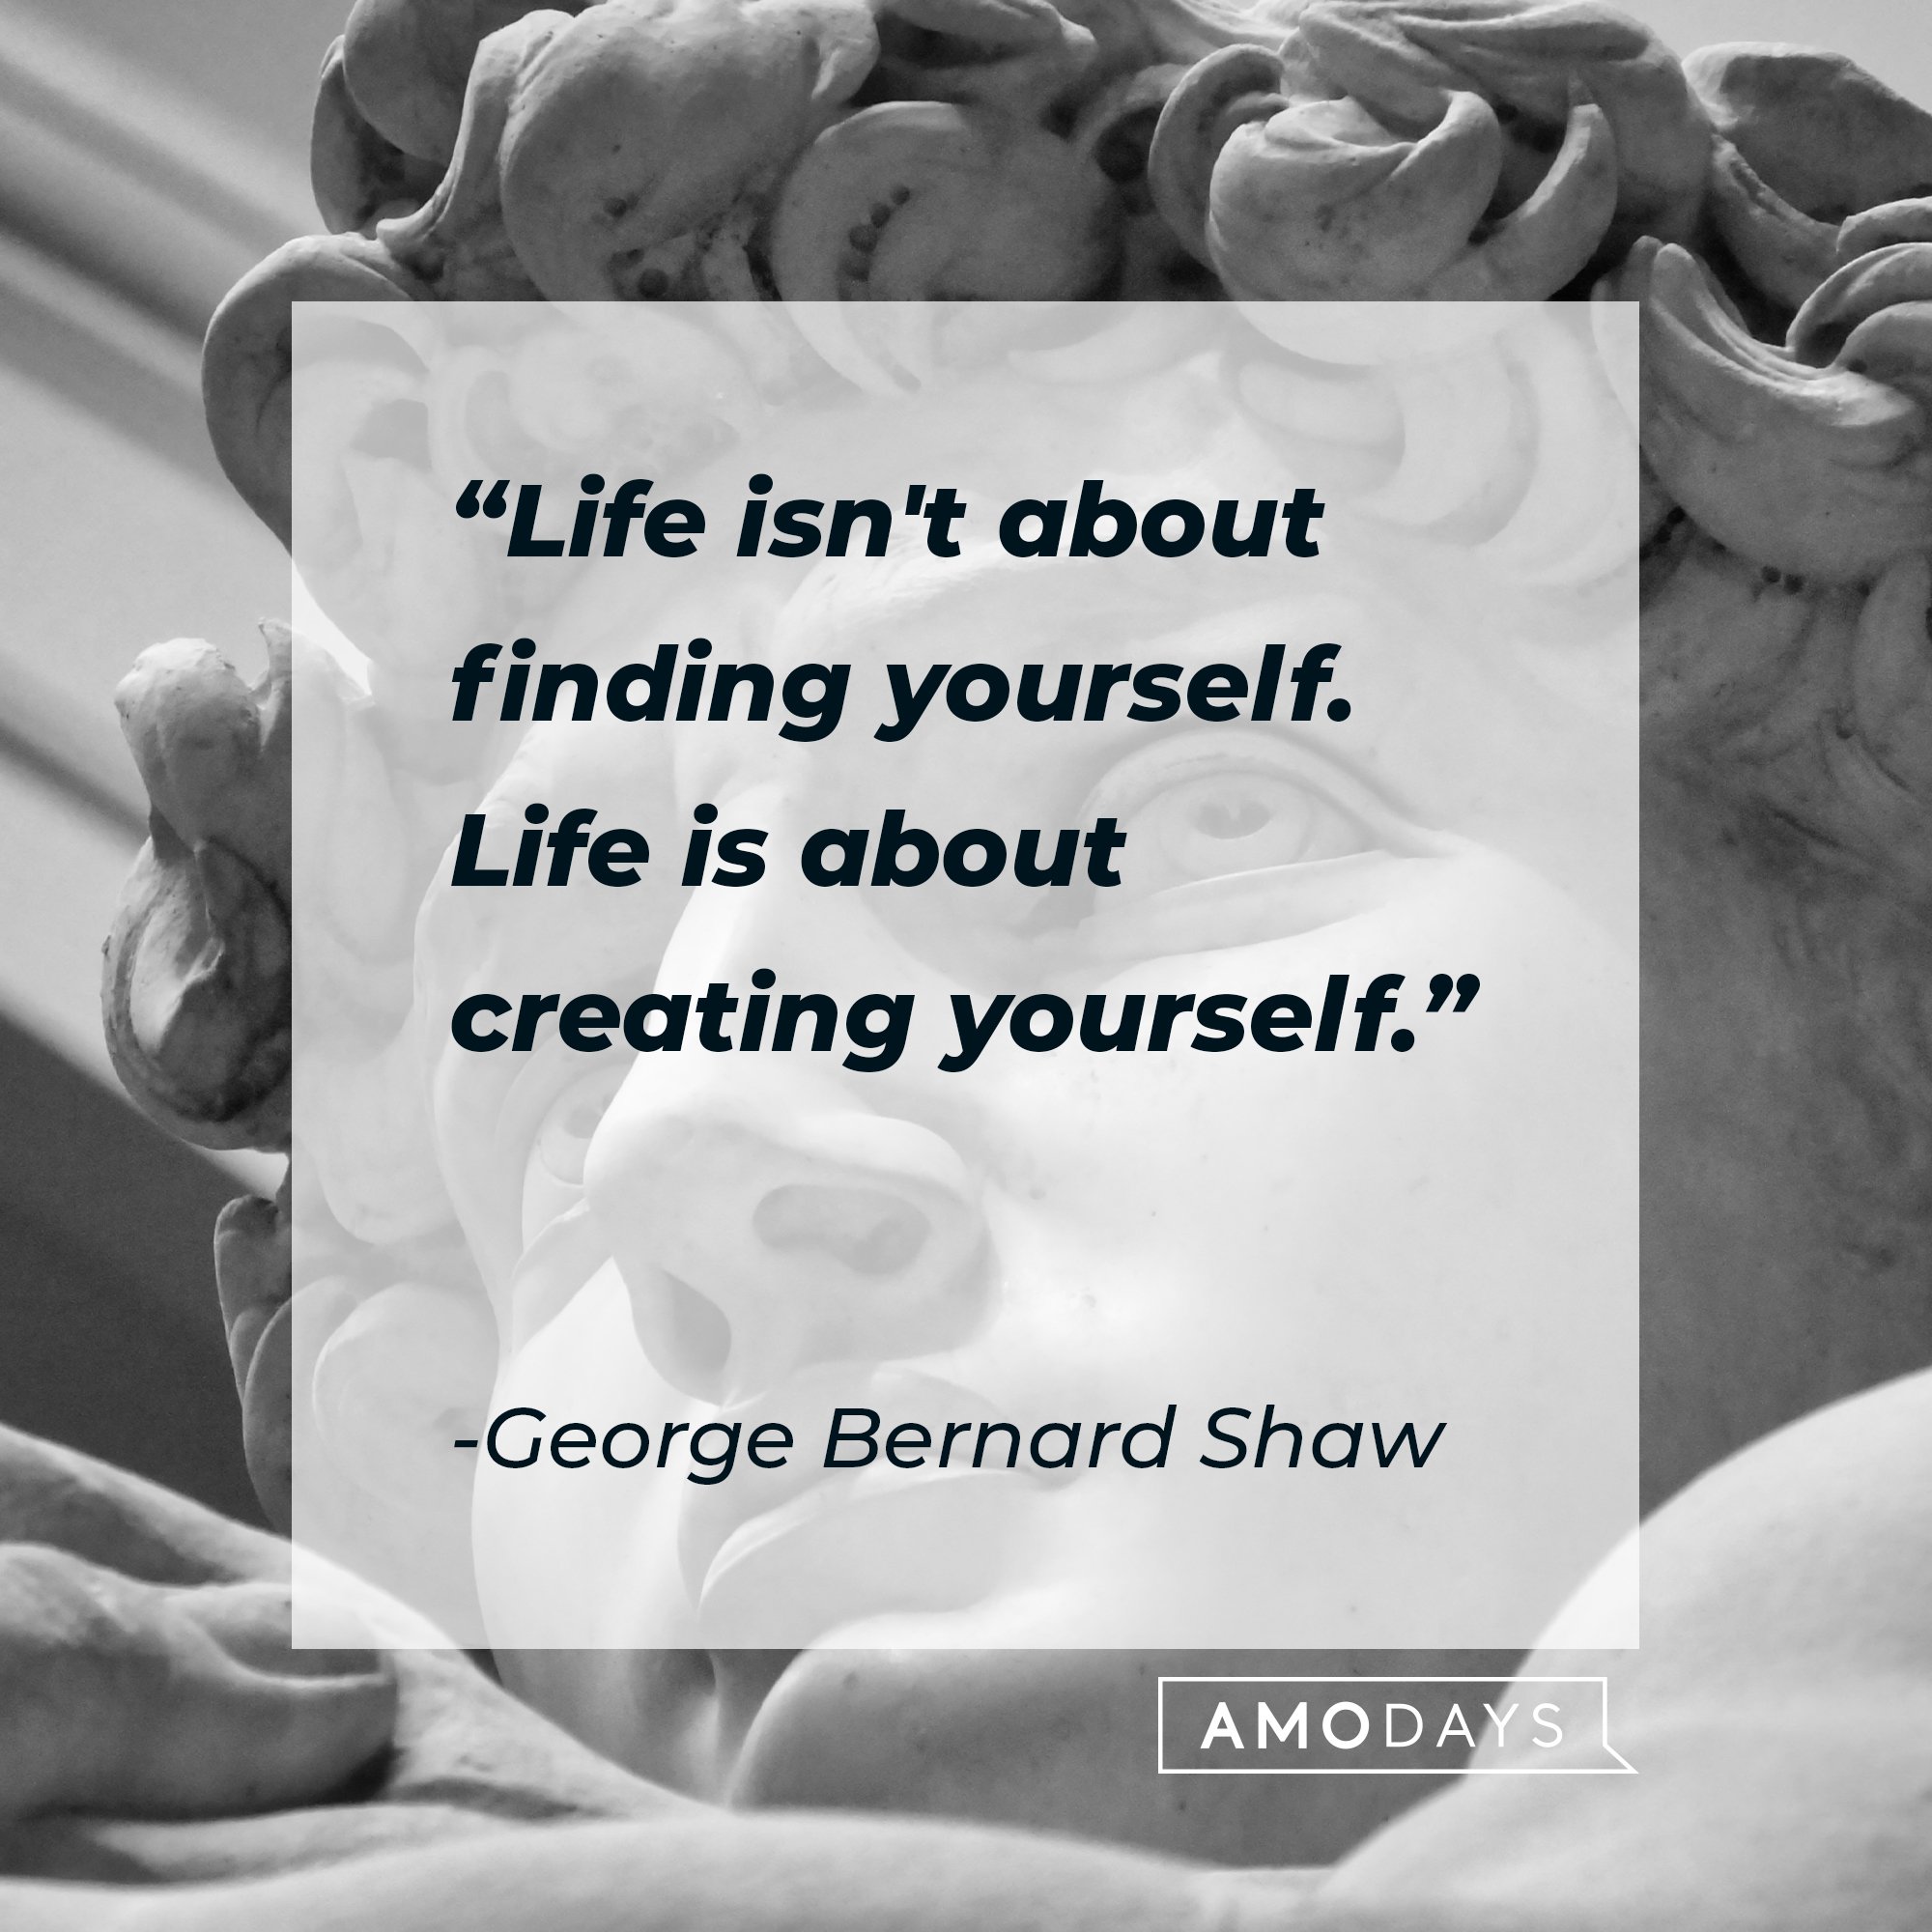 George Bernard Shaw’s quote: "Life isn't about finding yourself. Life is about creating yourself." | Image: AmoDays